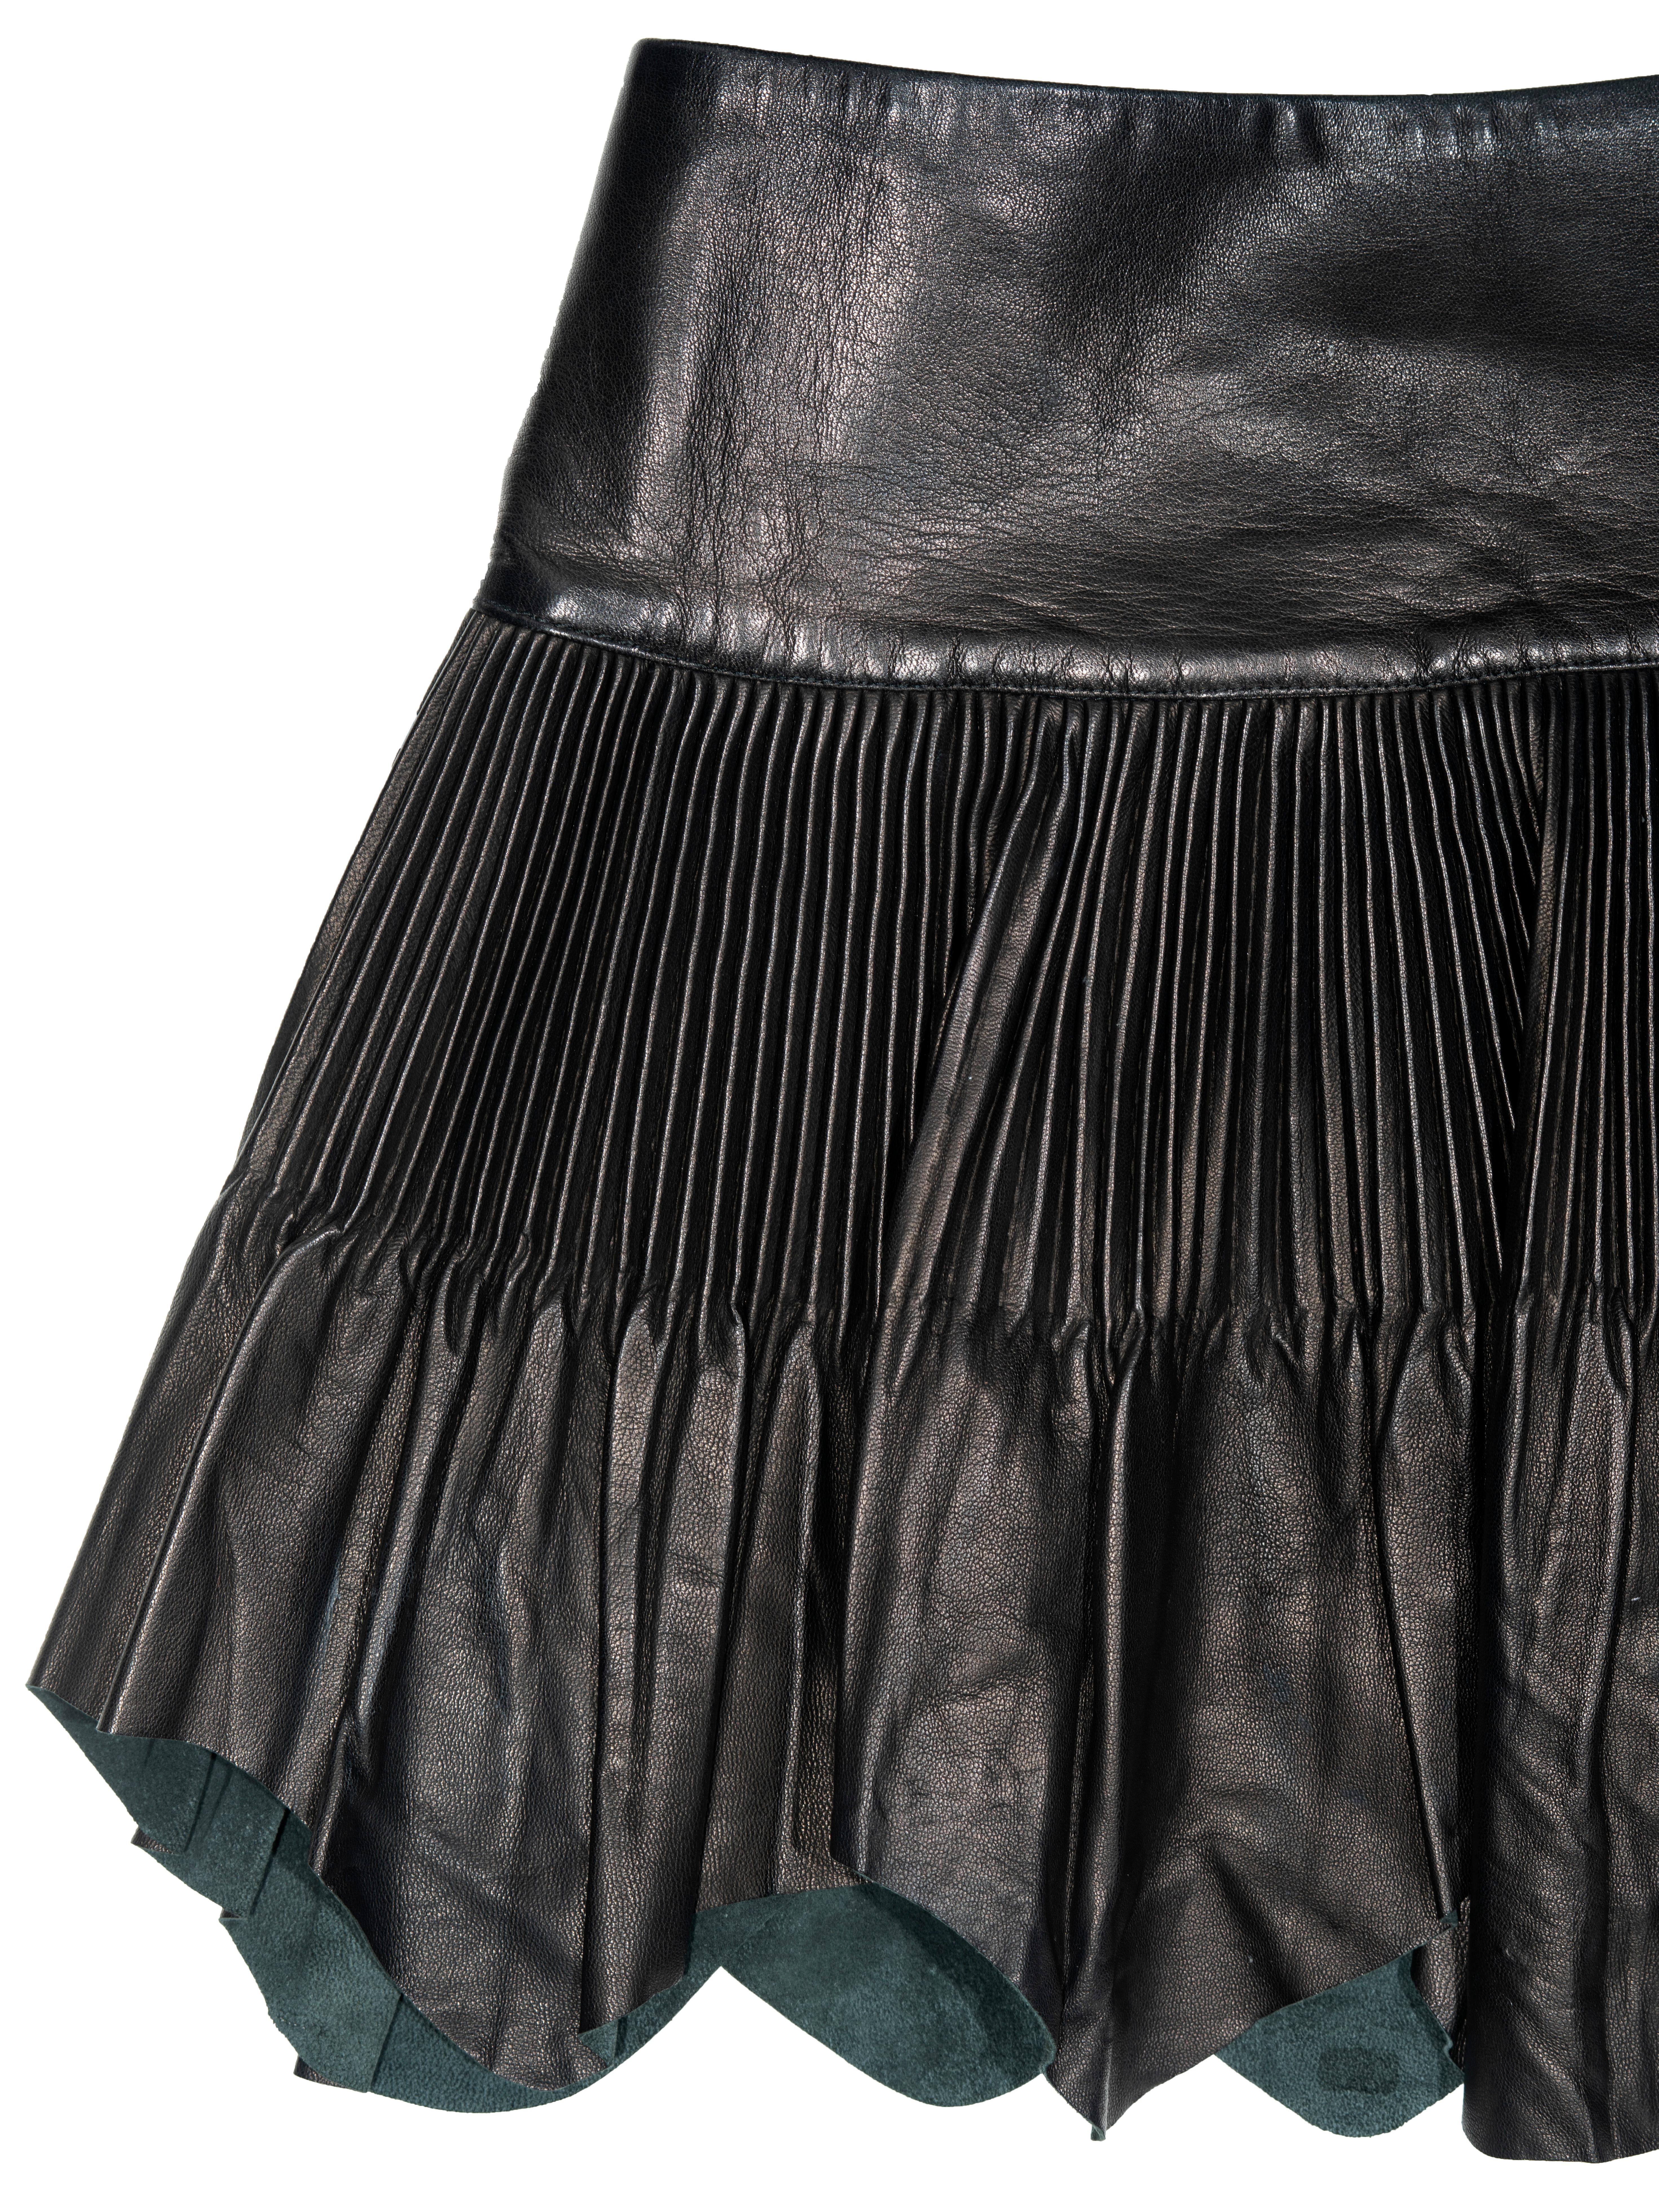 ▪ Jean Paul Gaultier mini wrap skirt
▪ Black finely pleated leather 
▪ Raw edge hem 
▪ Wrap fastening with long leather ties 
▪ IT 42 - FR 38 - UK 10
▪ Fall-Winter 2003
▪ 100% Leather
▪ Made in Italy